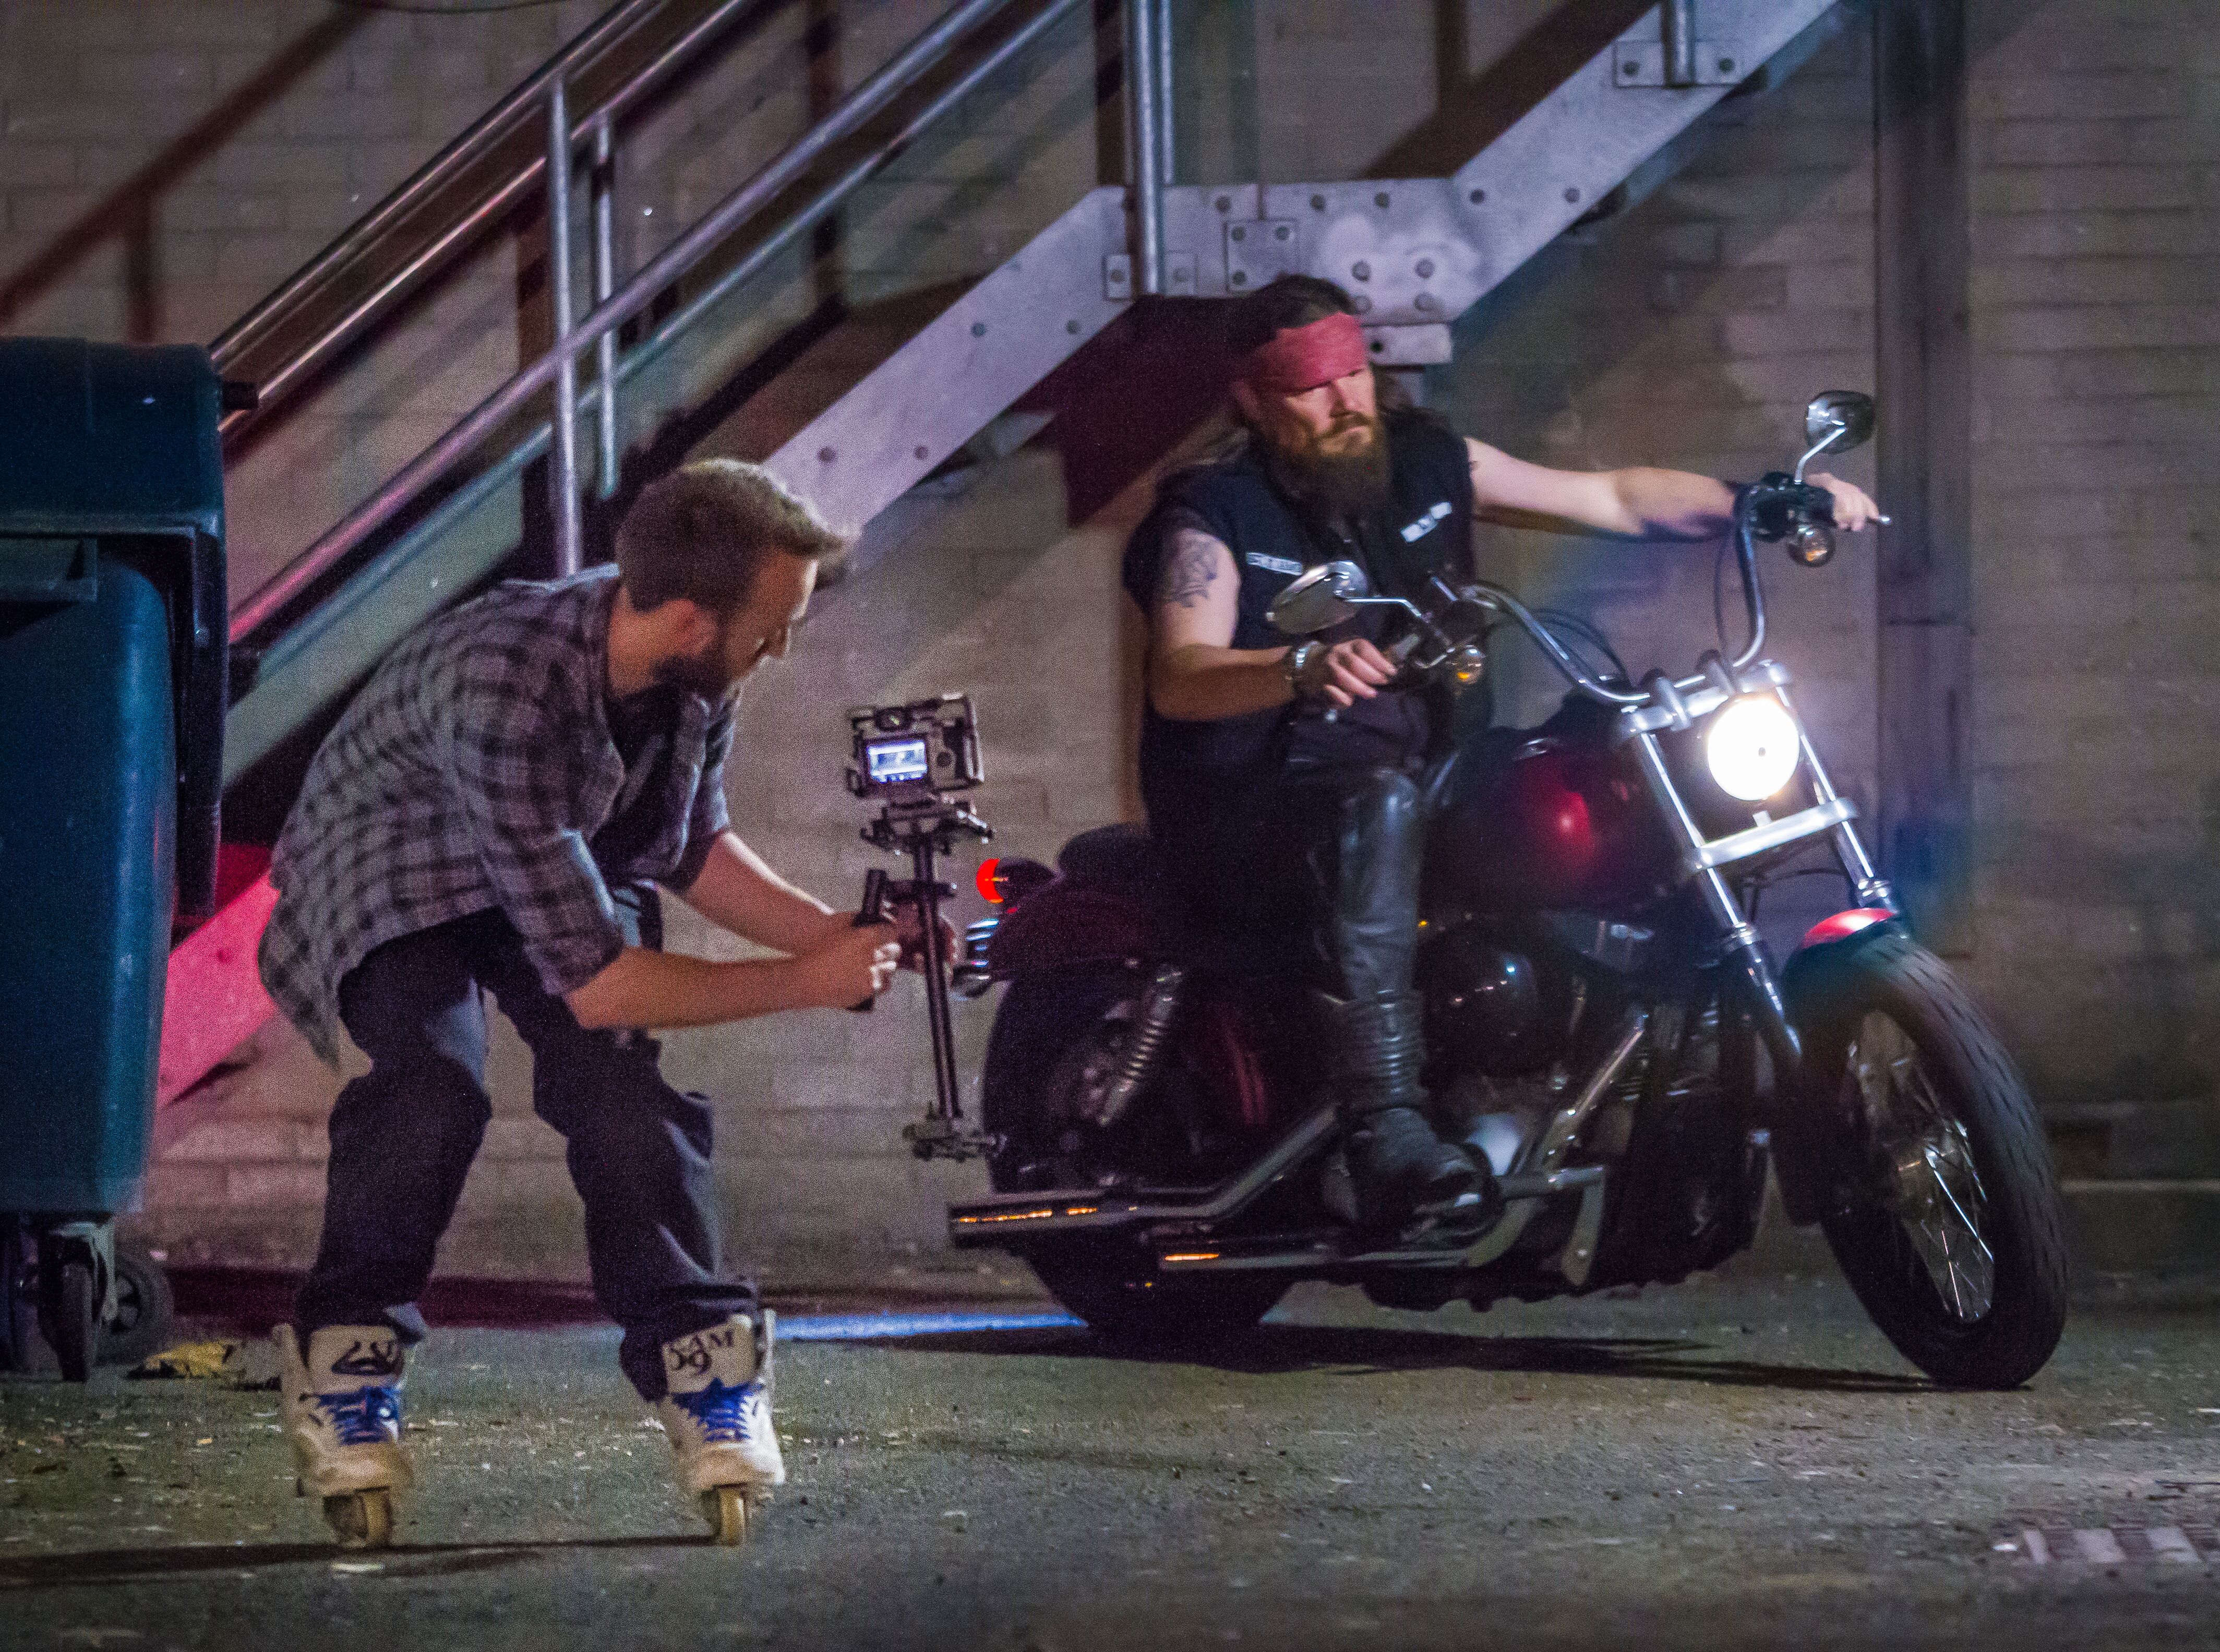 Playing the role of Ajax (An American Outlaw Biker) Riding On the set of 